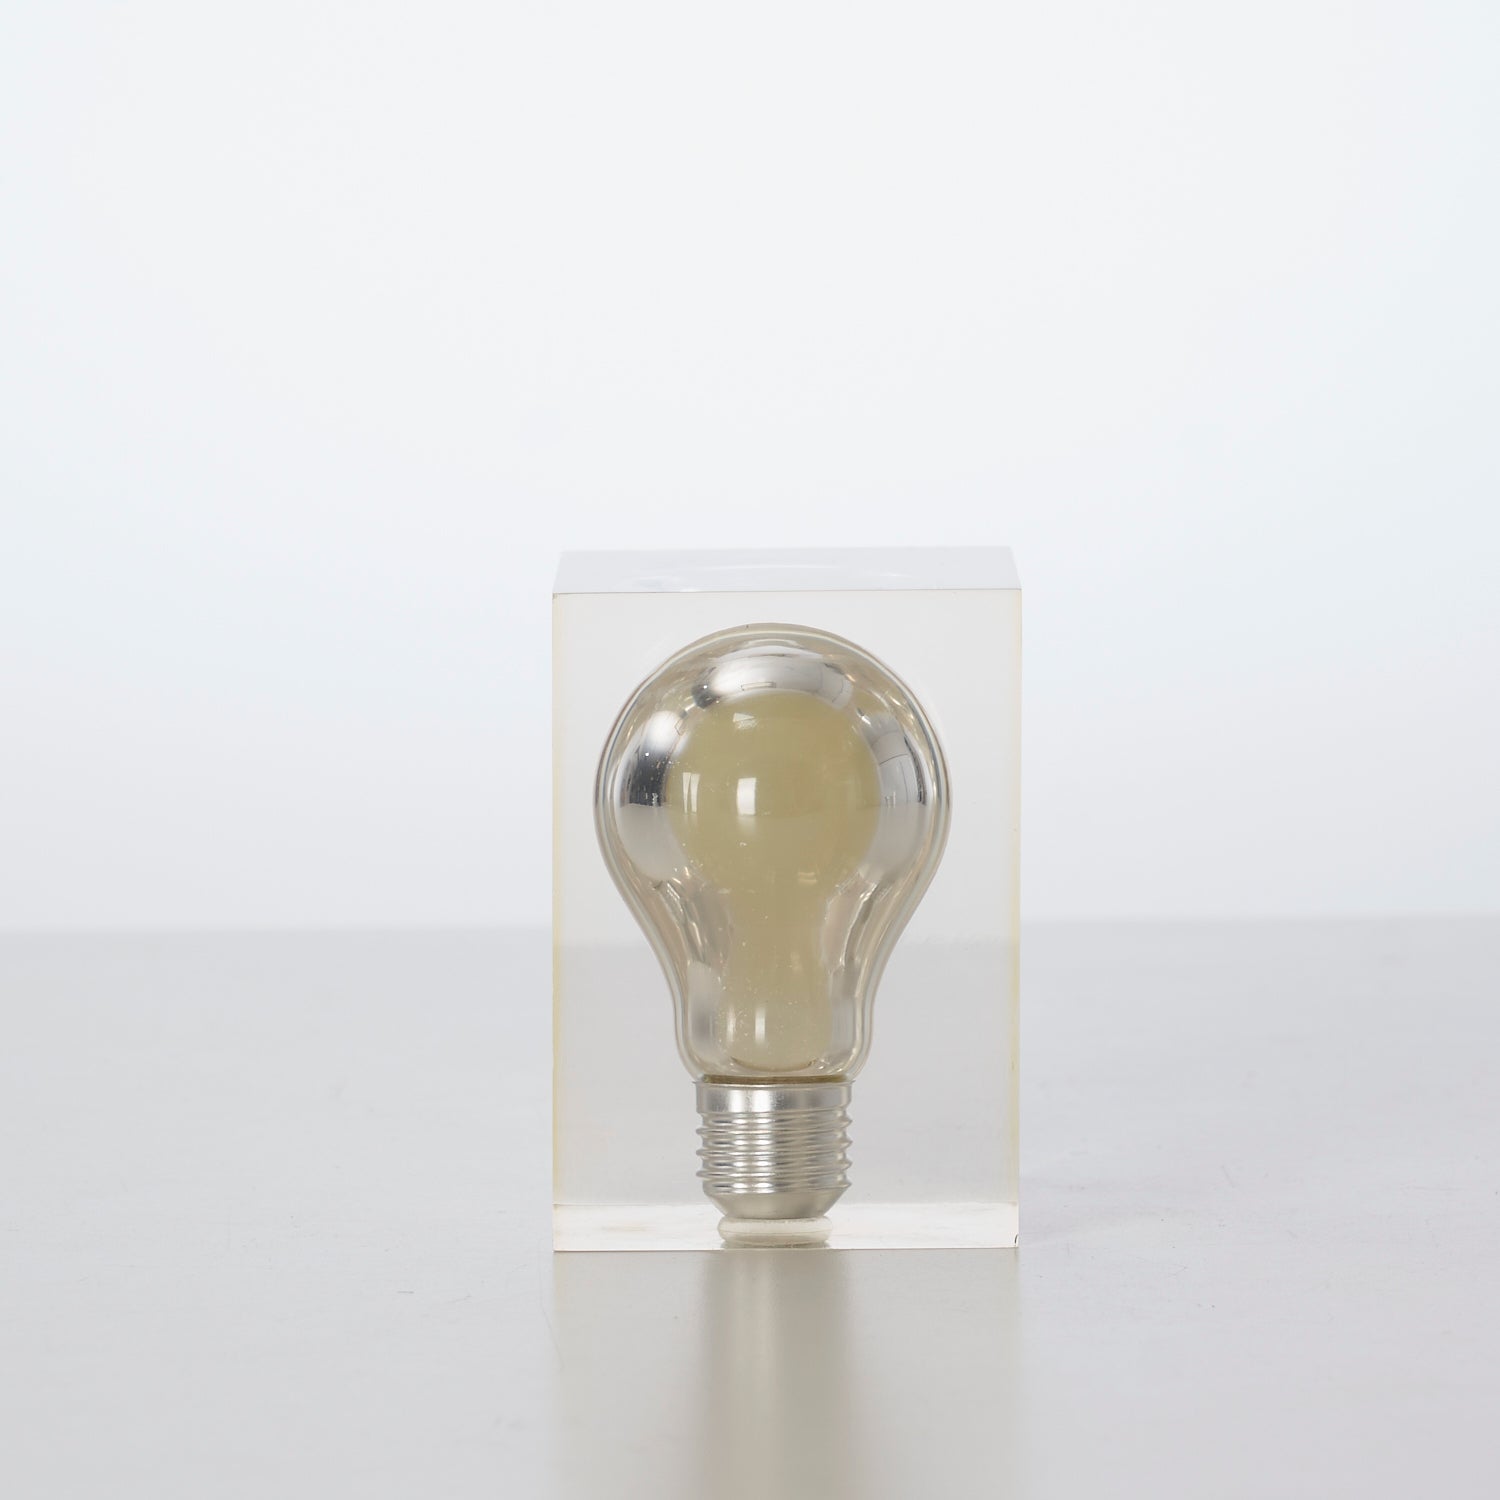 Lightbulb in Lucite Paperweight by Pierre Giraudon